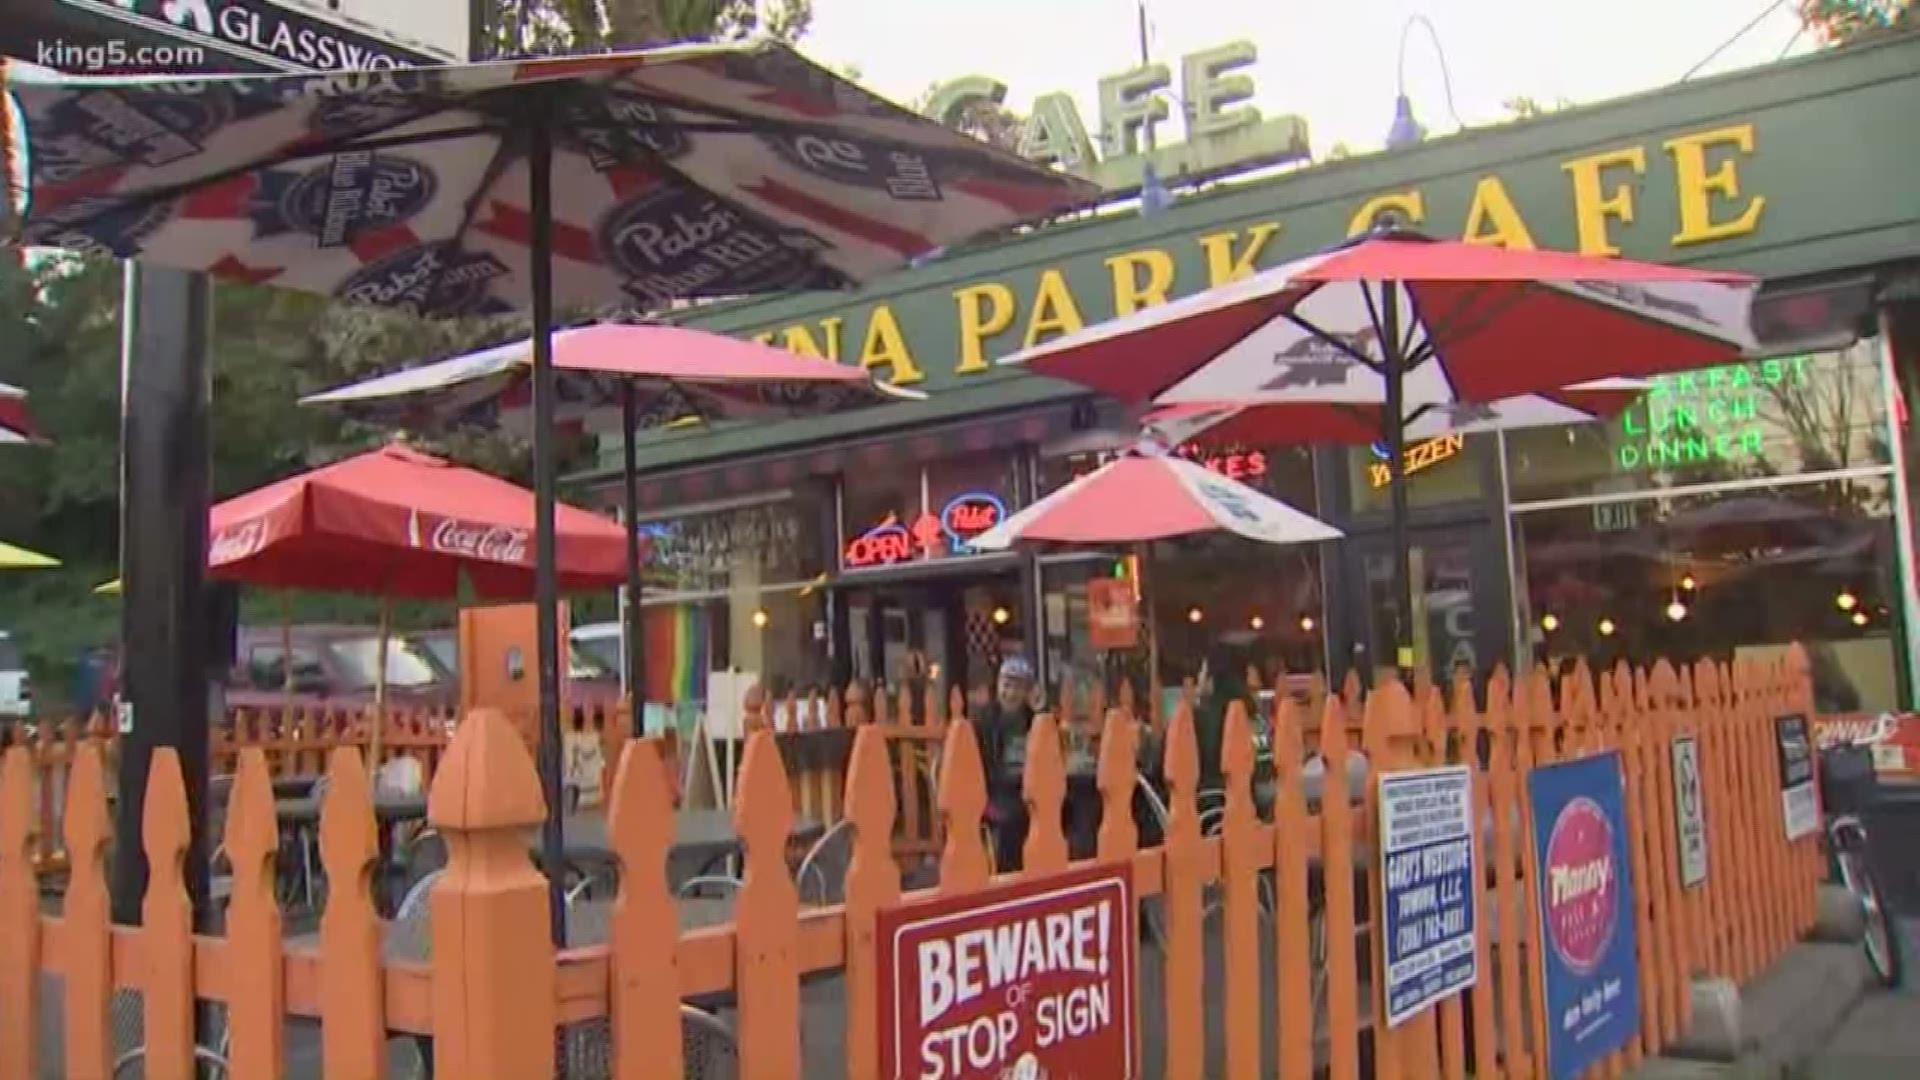 Luna Park Cafe on SW Avalon Way has been struggling with business due to construction work that's been going on outside their doors for months.